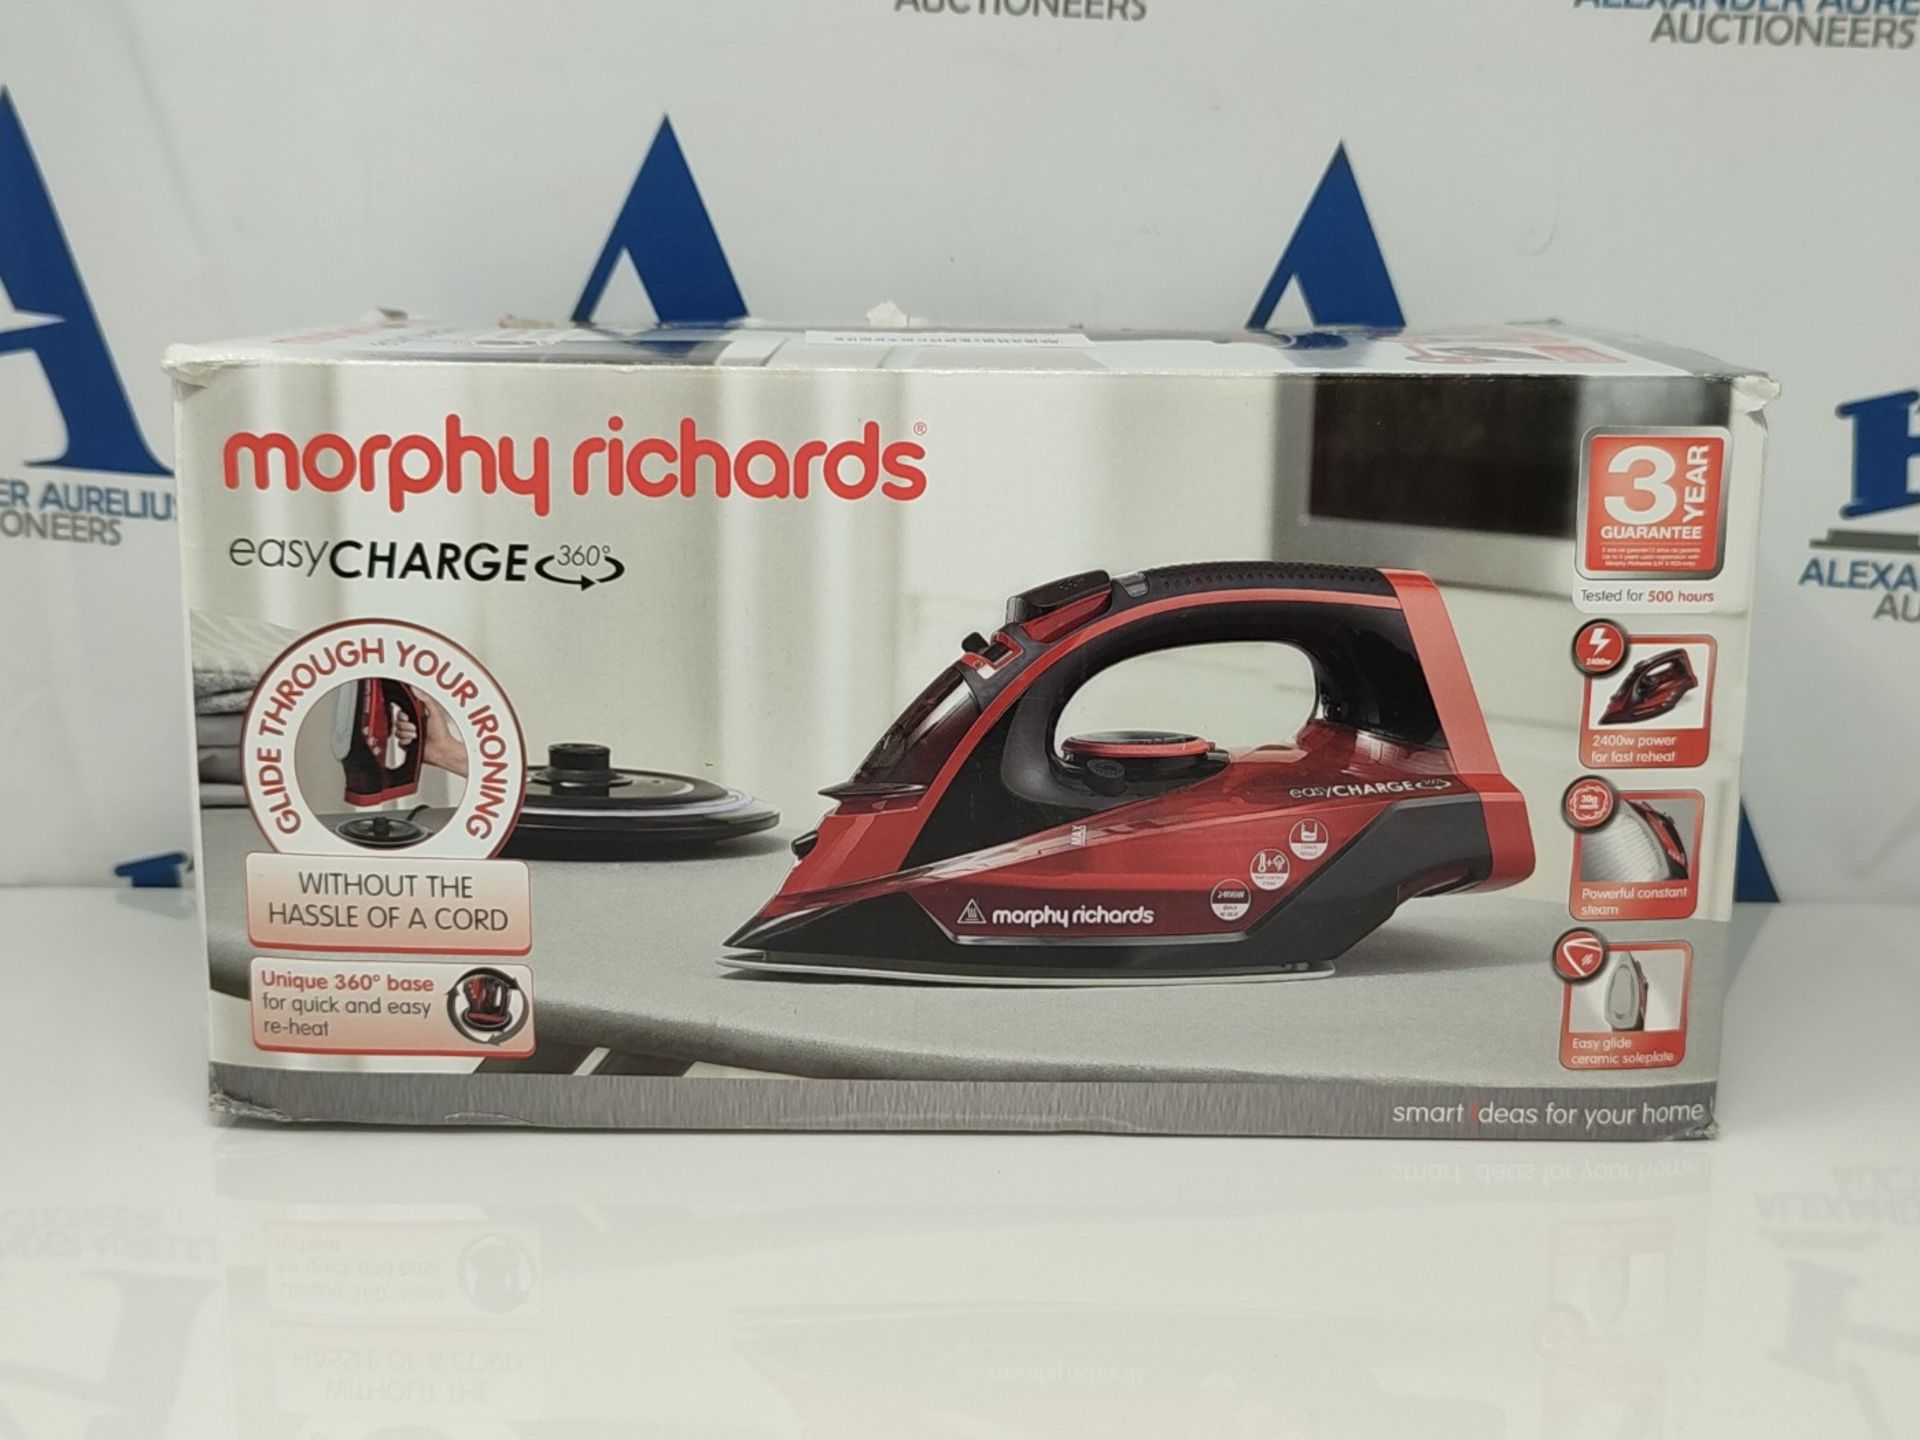 Morphy Richards EasyCHARGE Cordless Iron, Precision Tip, Ceramic Soleplate, Anti Scale - Bild 2 aus 3